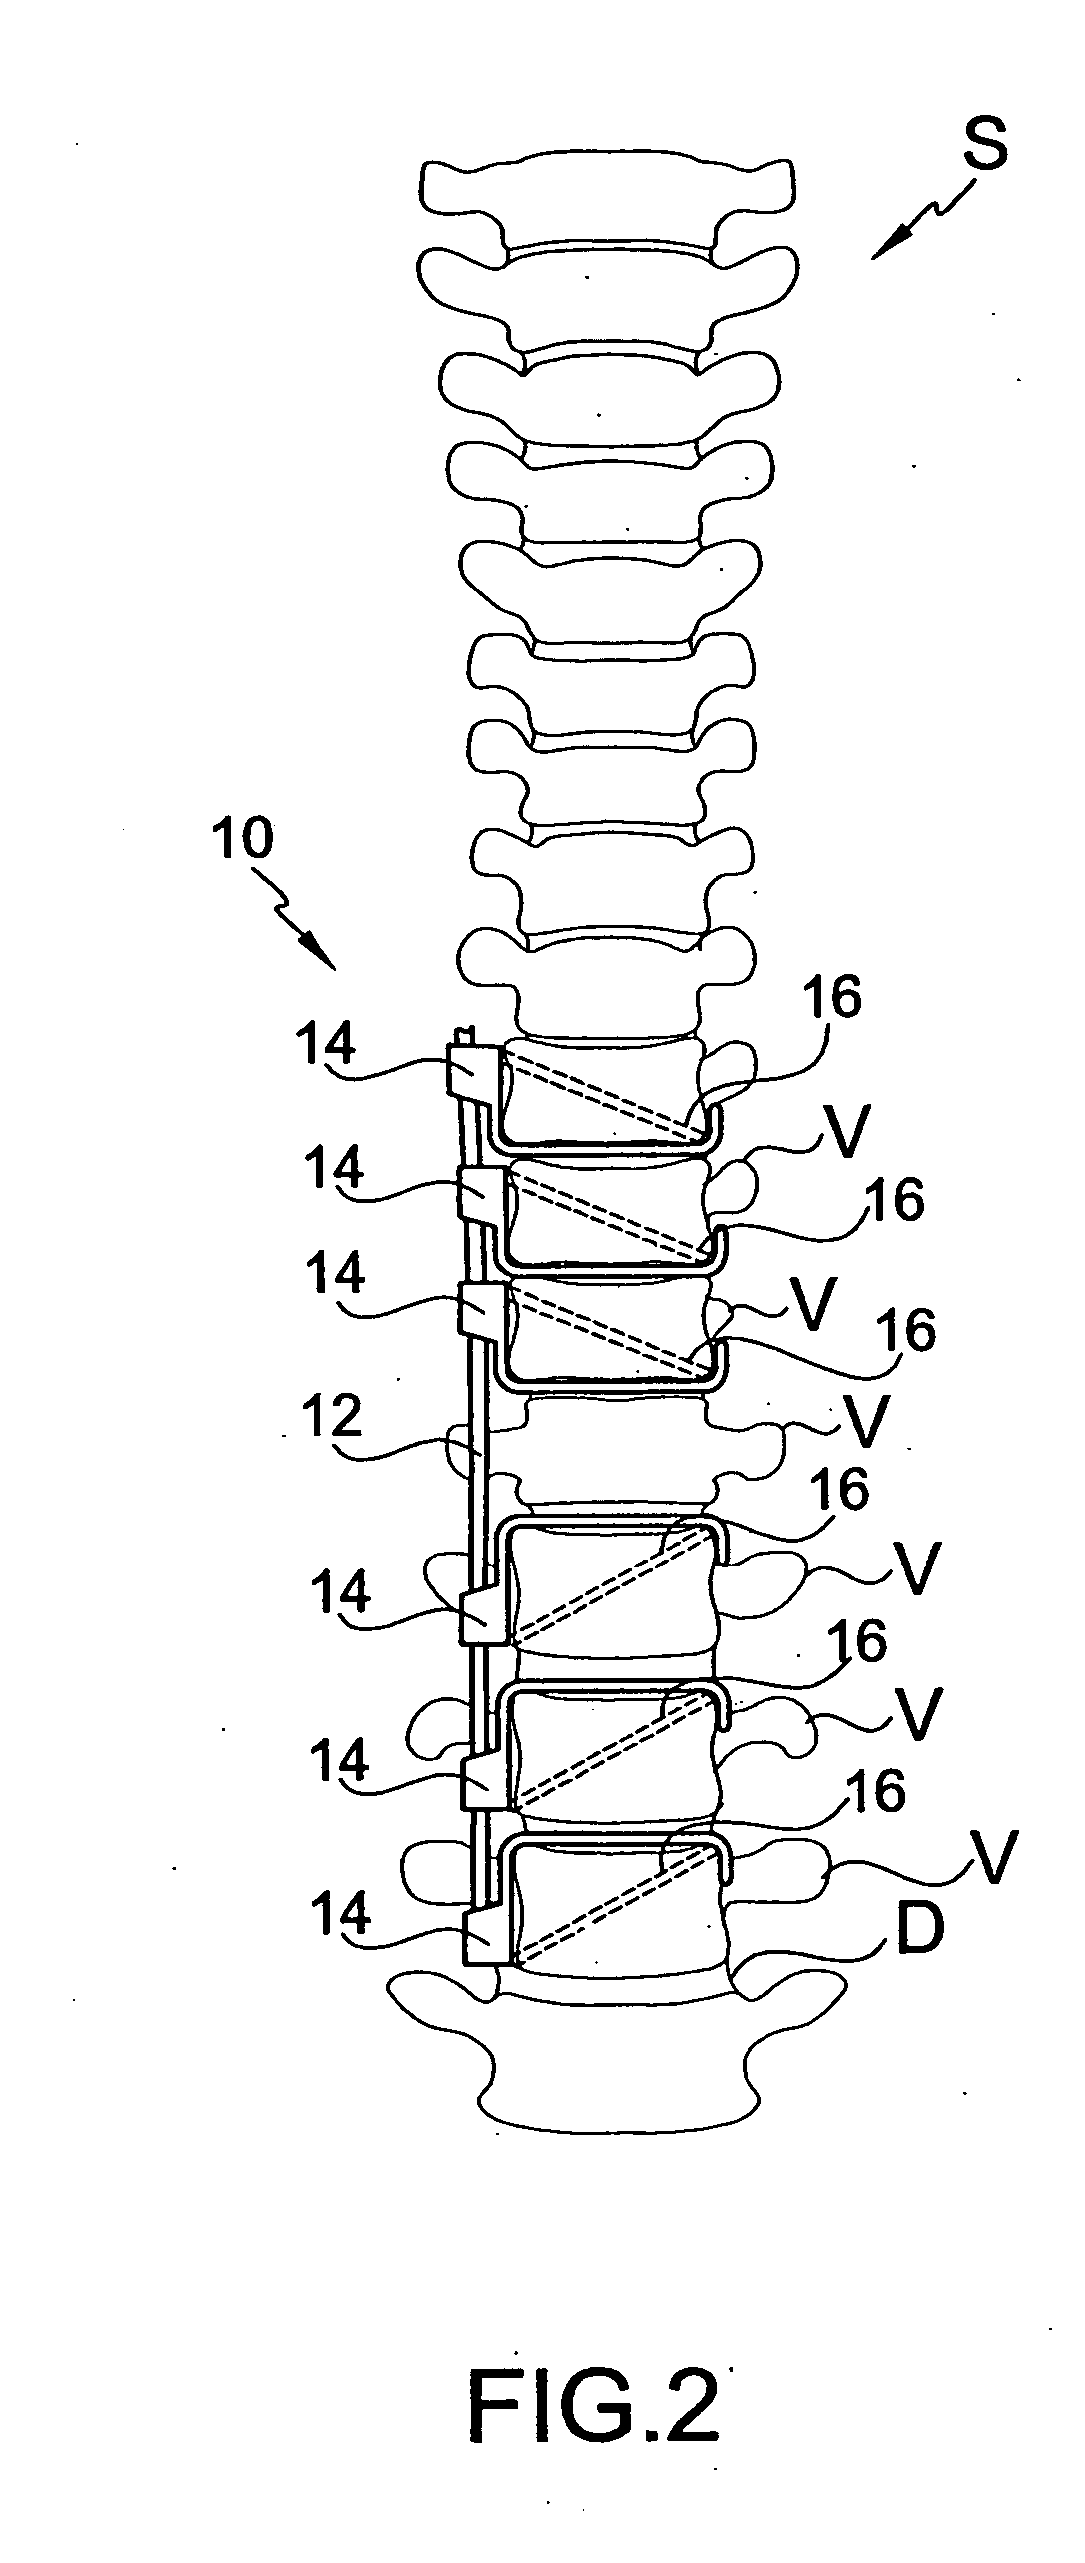 Connector for attaching an alignment rod to a bone structure